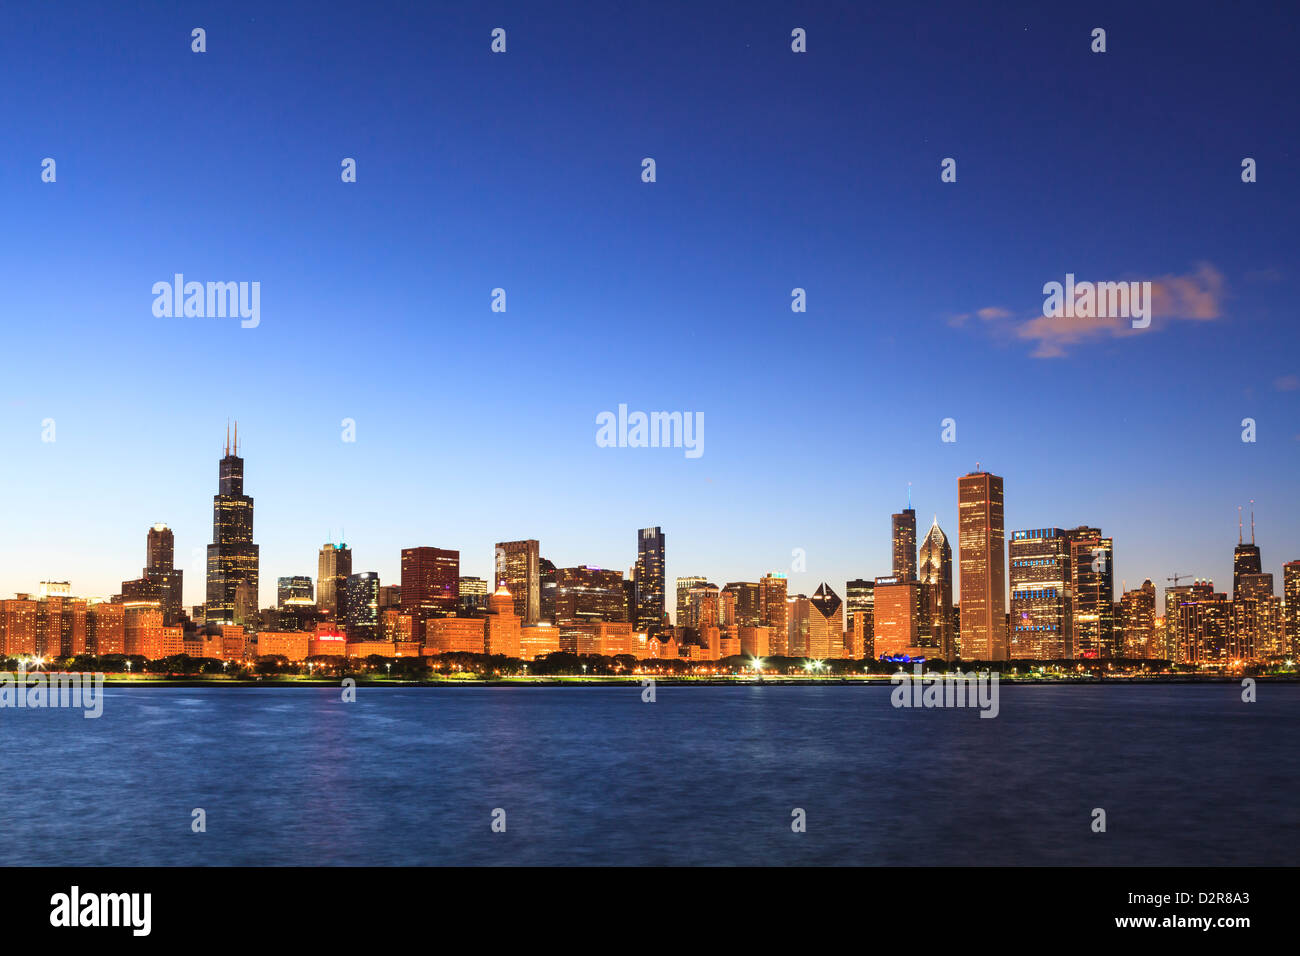 Chicago skyline and Lake Michigan at dusk with the Willis Tower, formerly the Sears Tower, on the left, Chicago, Illinois, USA Stock Photo